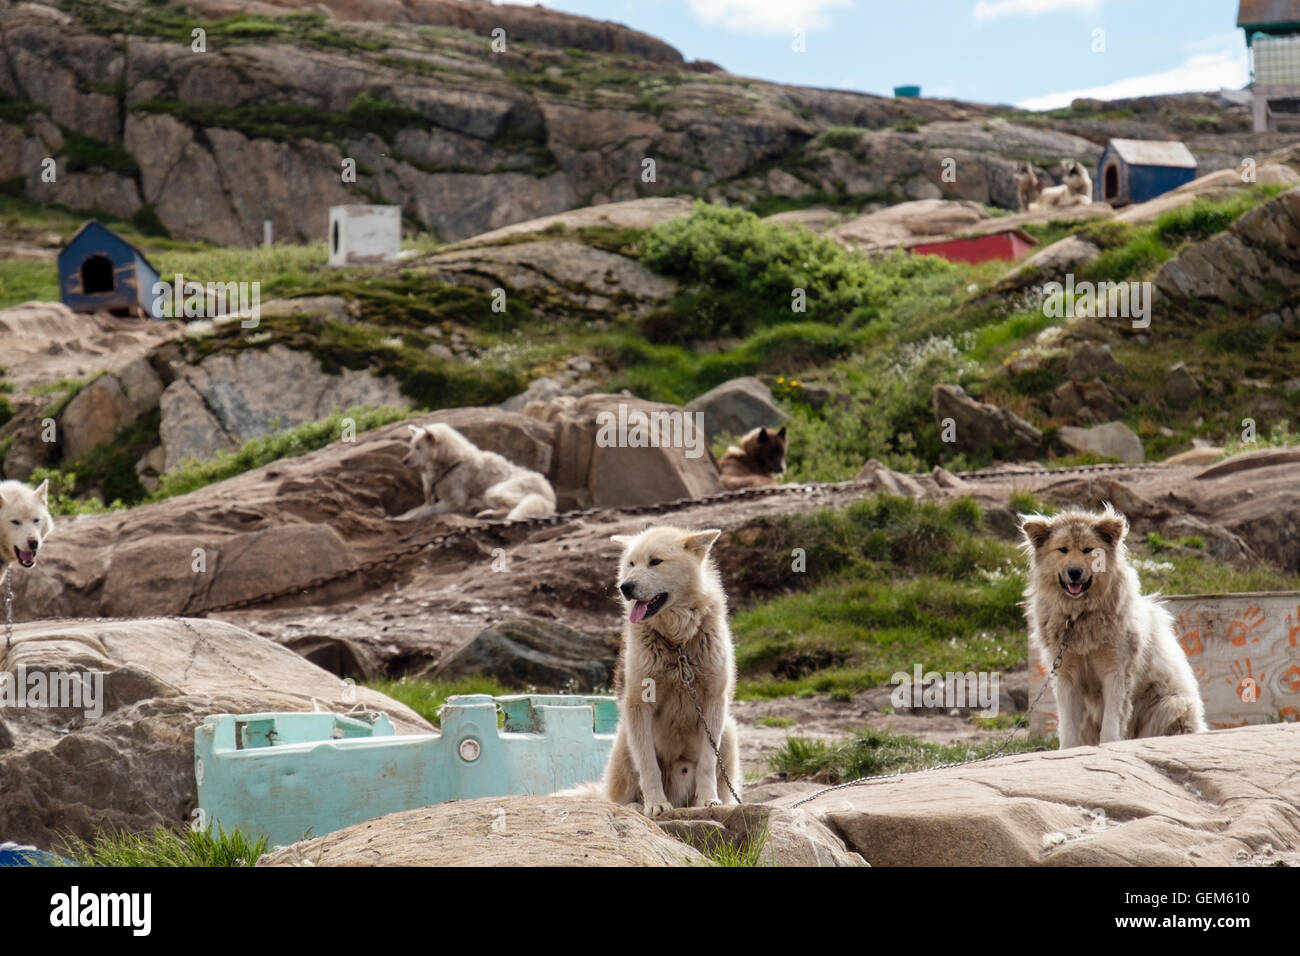 Greenland Huskies (Canis lupus familiaris borealis) chained up outside in summer. Sisimiut (Holsteinsborg), Qeqqata, Greenland Stock Photo